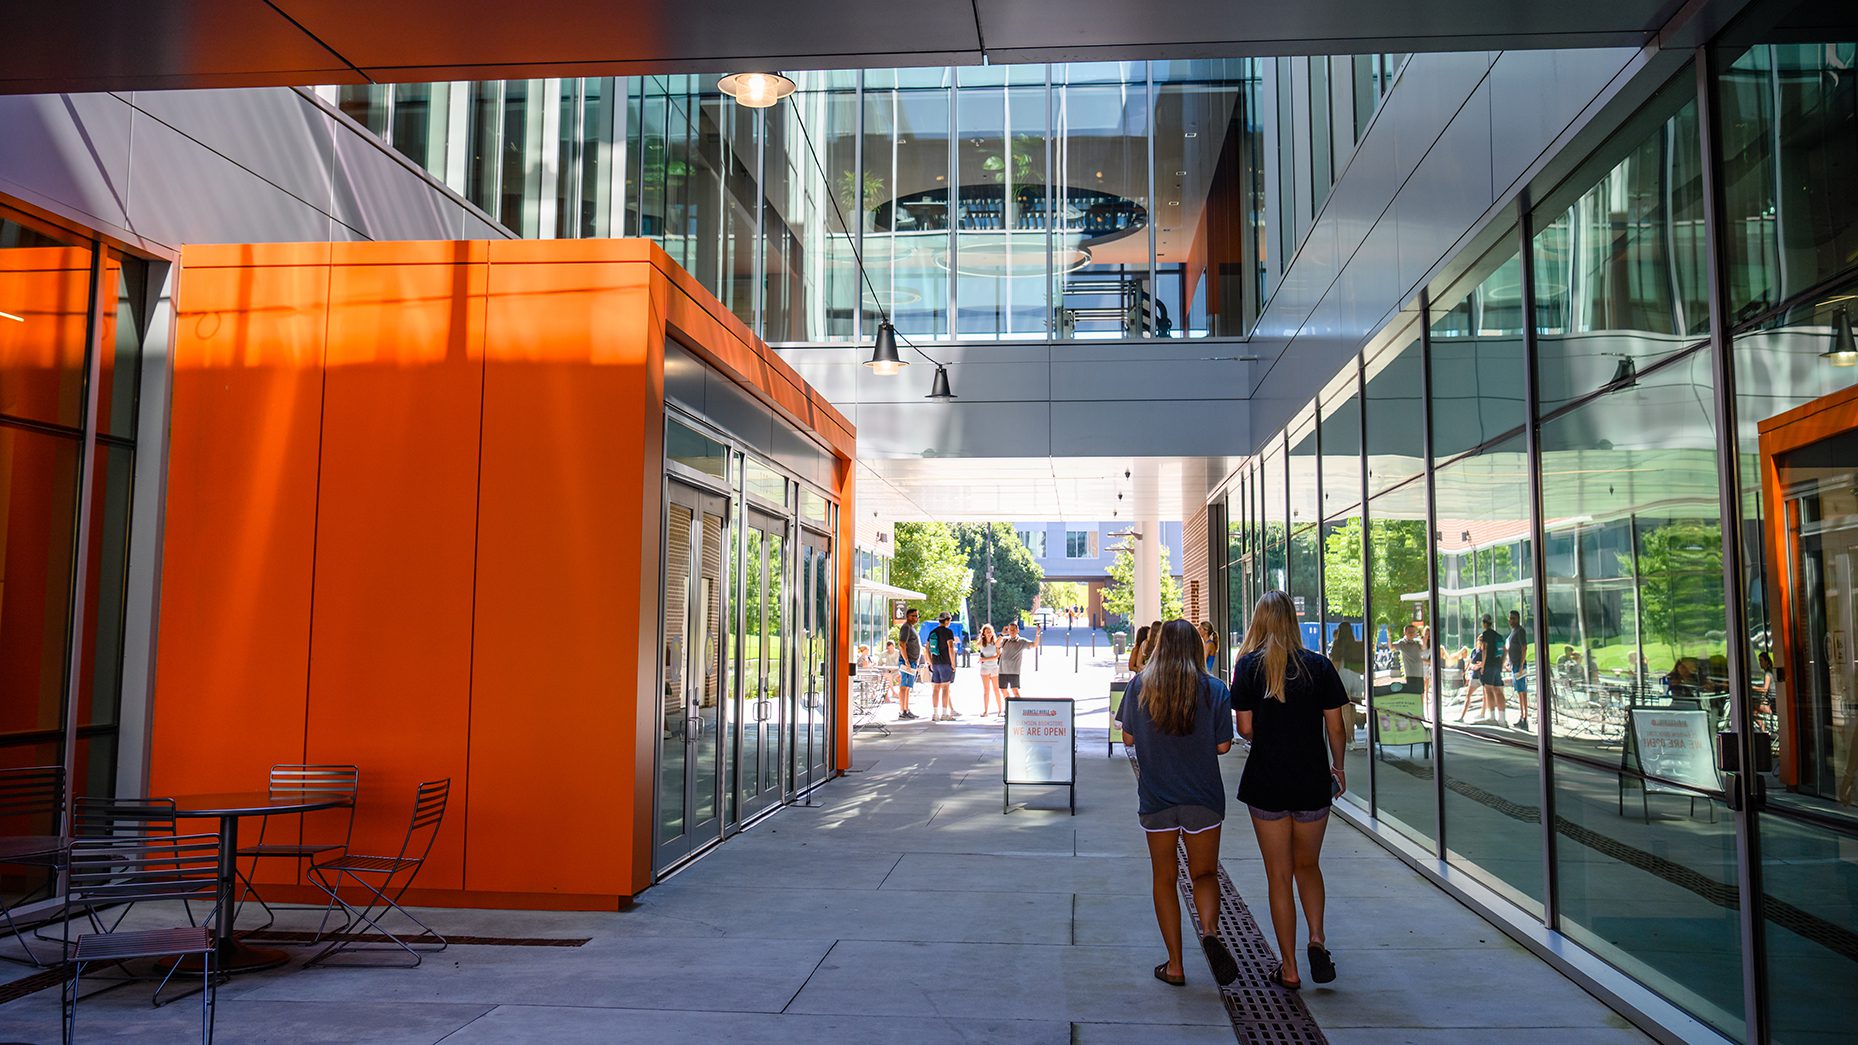 Two women walk through an outdoor corridor lined with glass and an orange wall